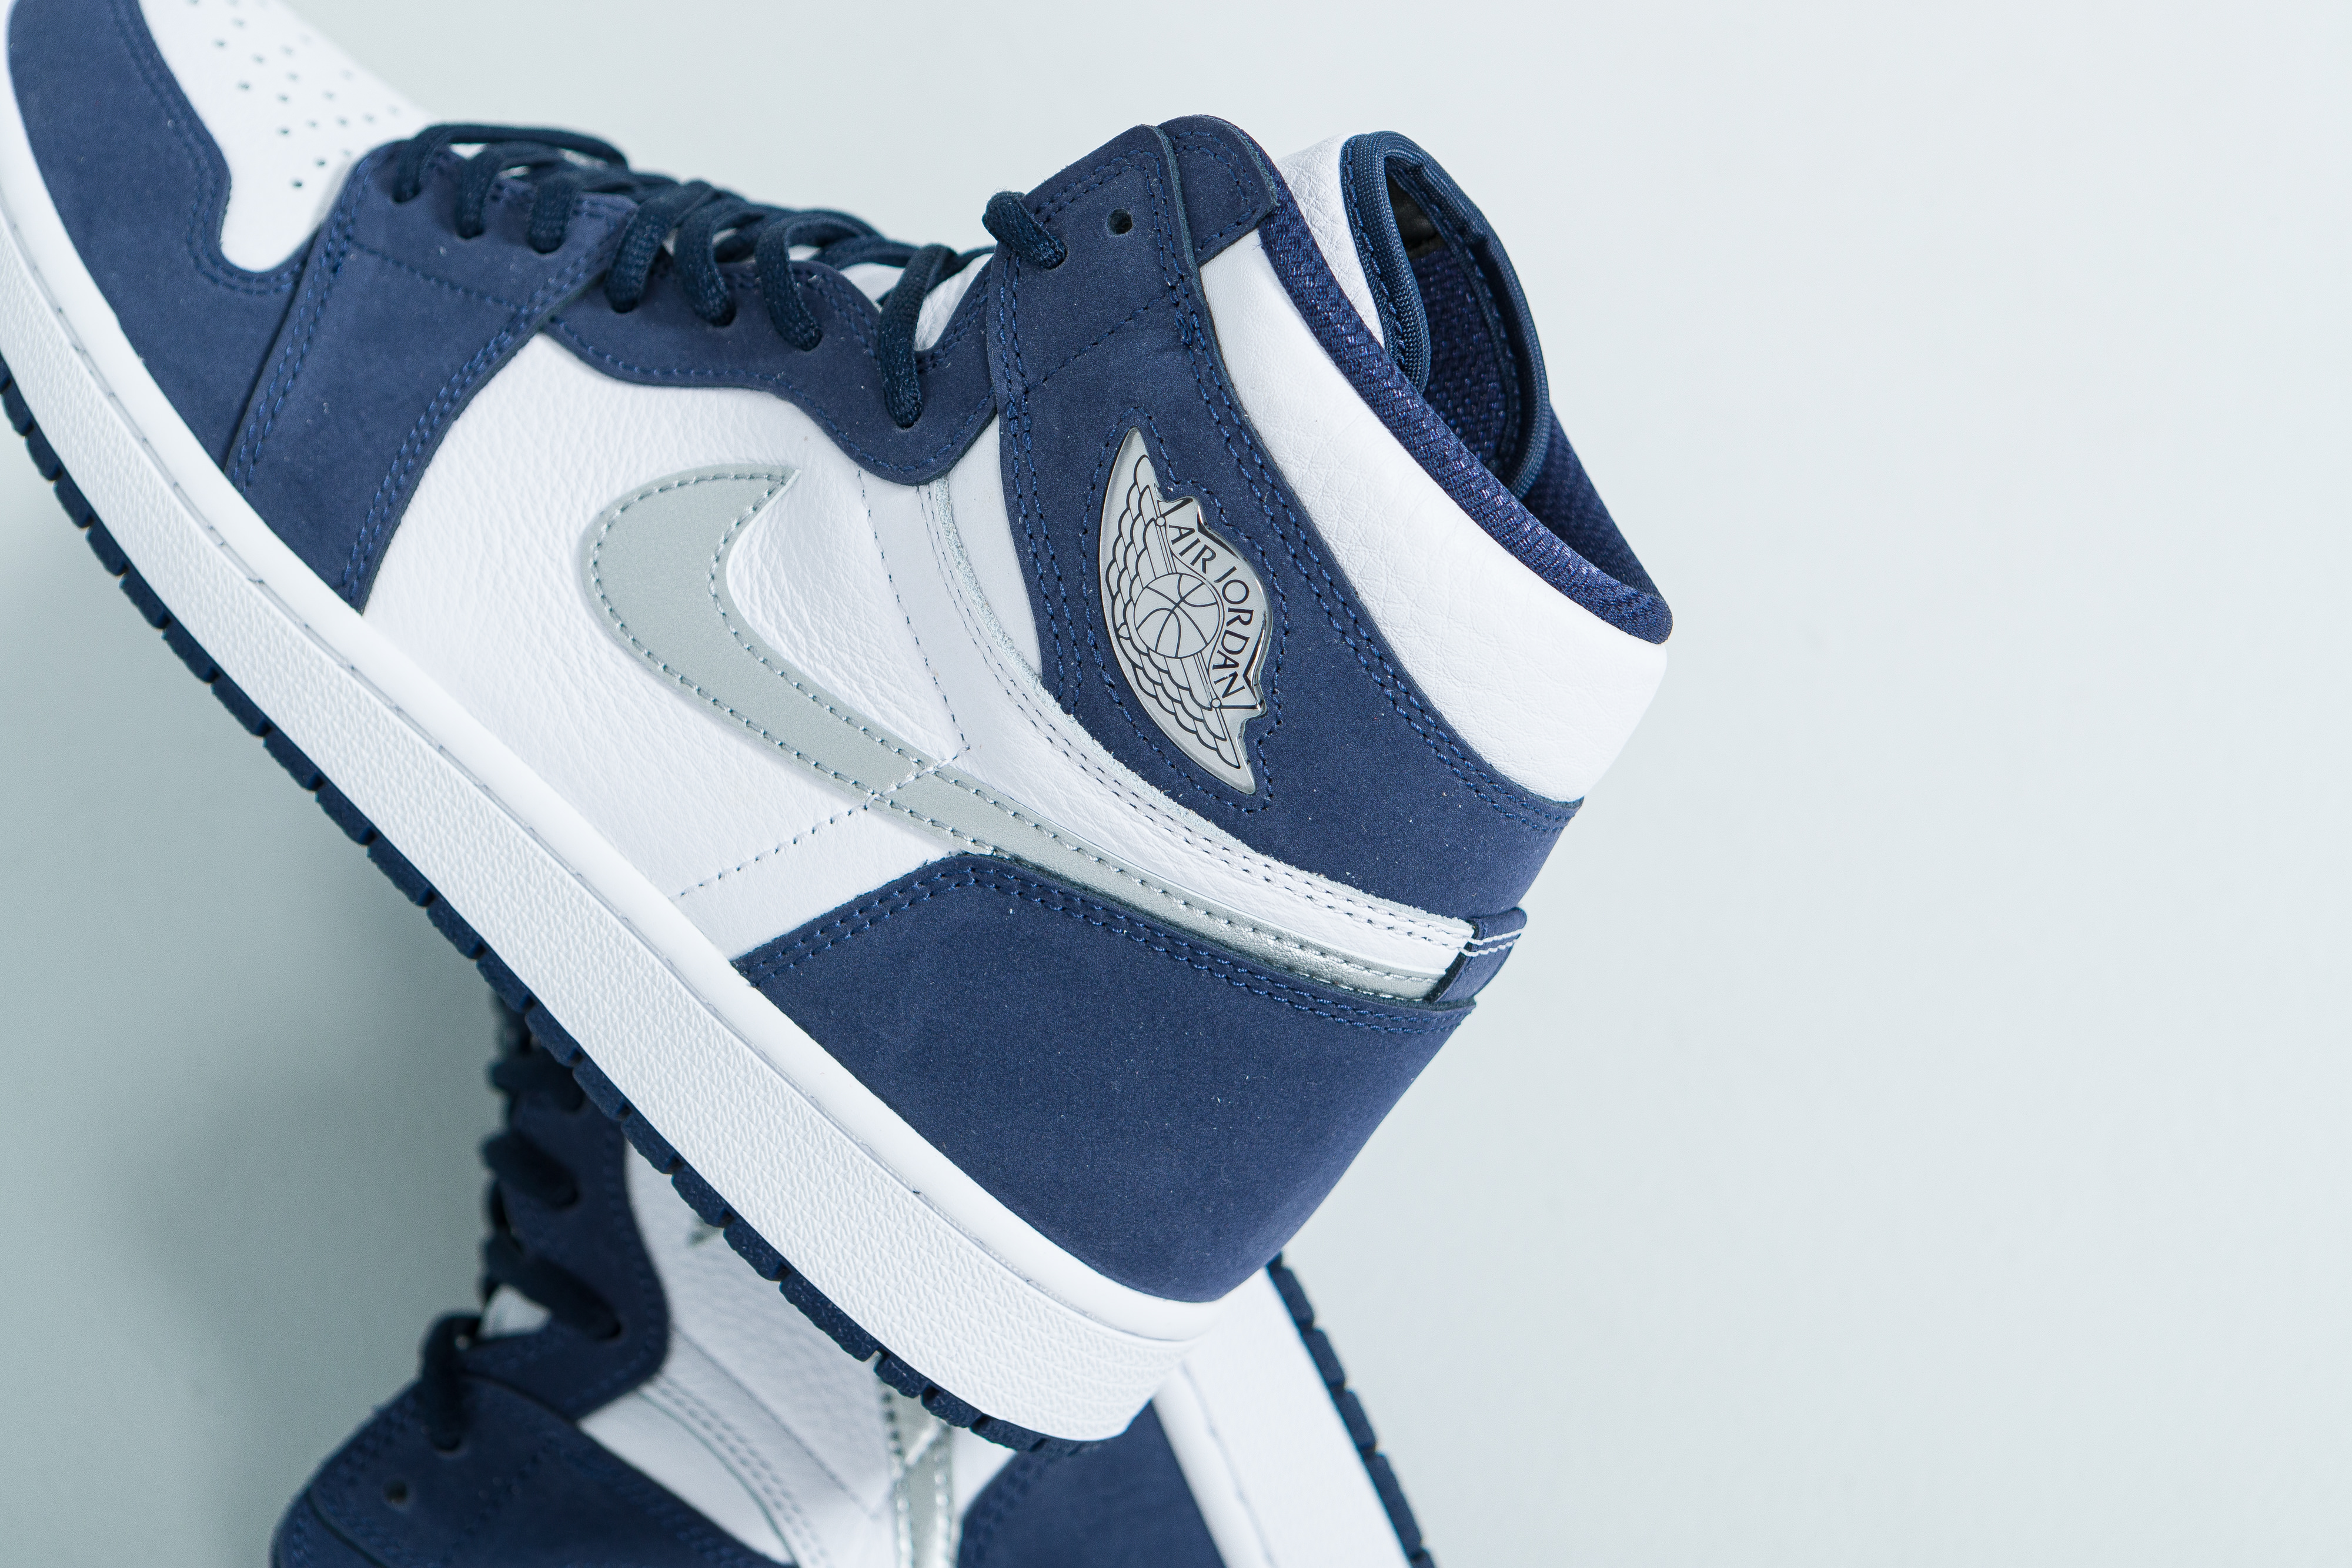 Up There Launches - Nike Air Jordan 1 Retro CO.JP 'Midnight Navy'